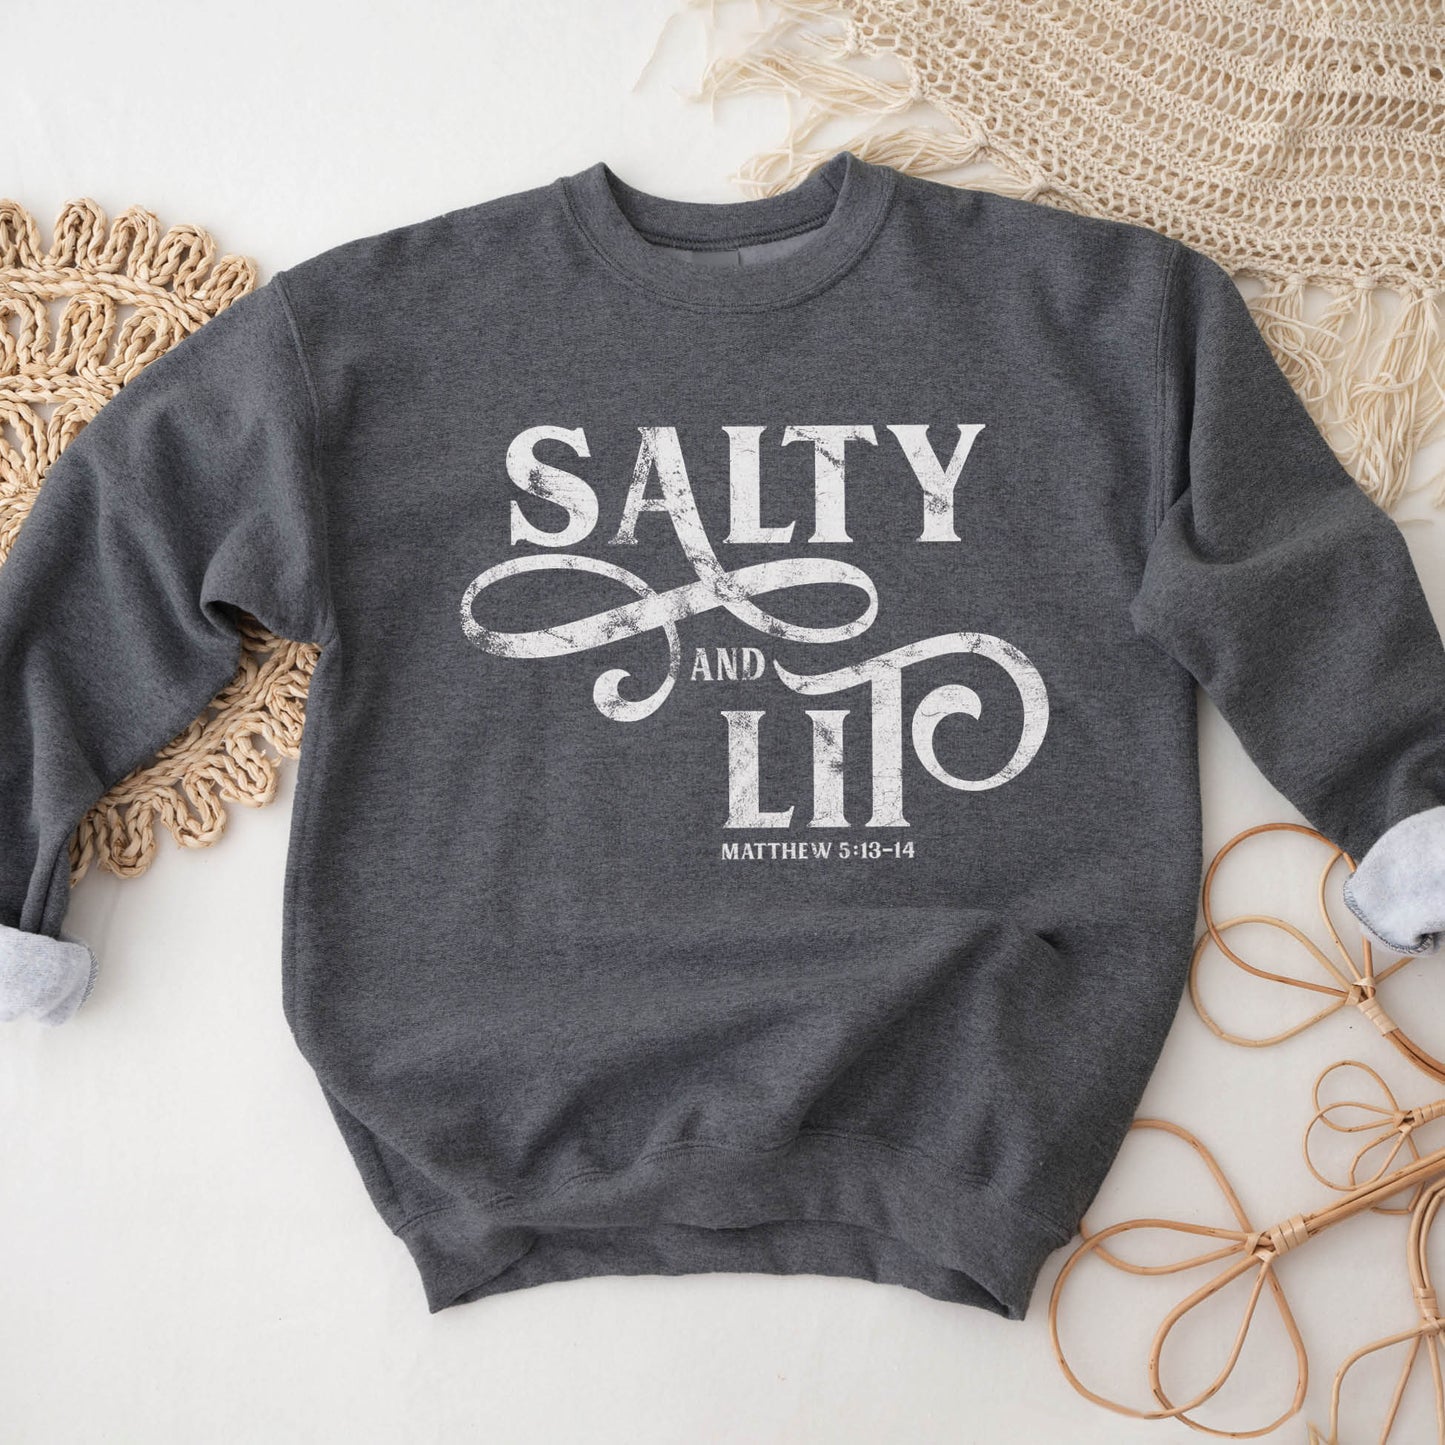 Salty And Lit Matthew 5:13-14 bible verse funny Christian aesthetic unisex crewneck sweatshirt with distressed swirl typography design printed in white on cozy heather dark gray sweater for women